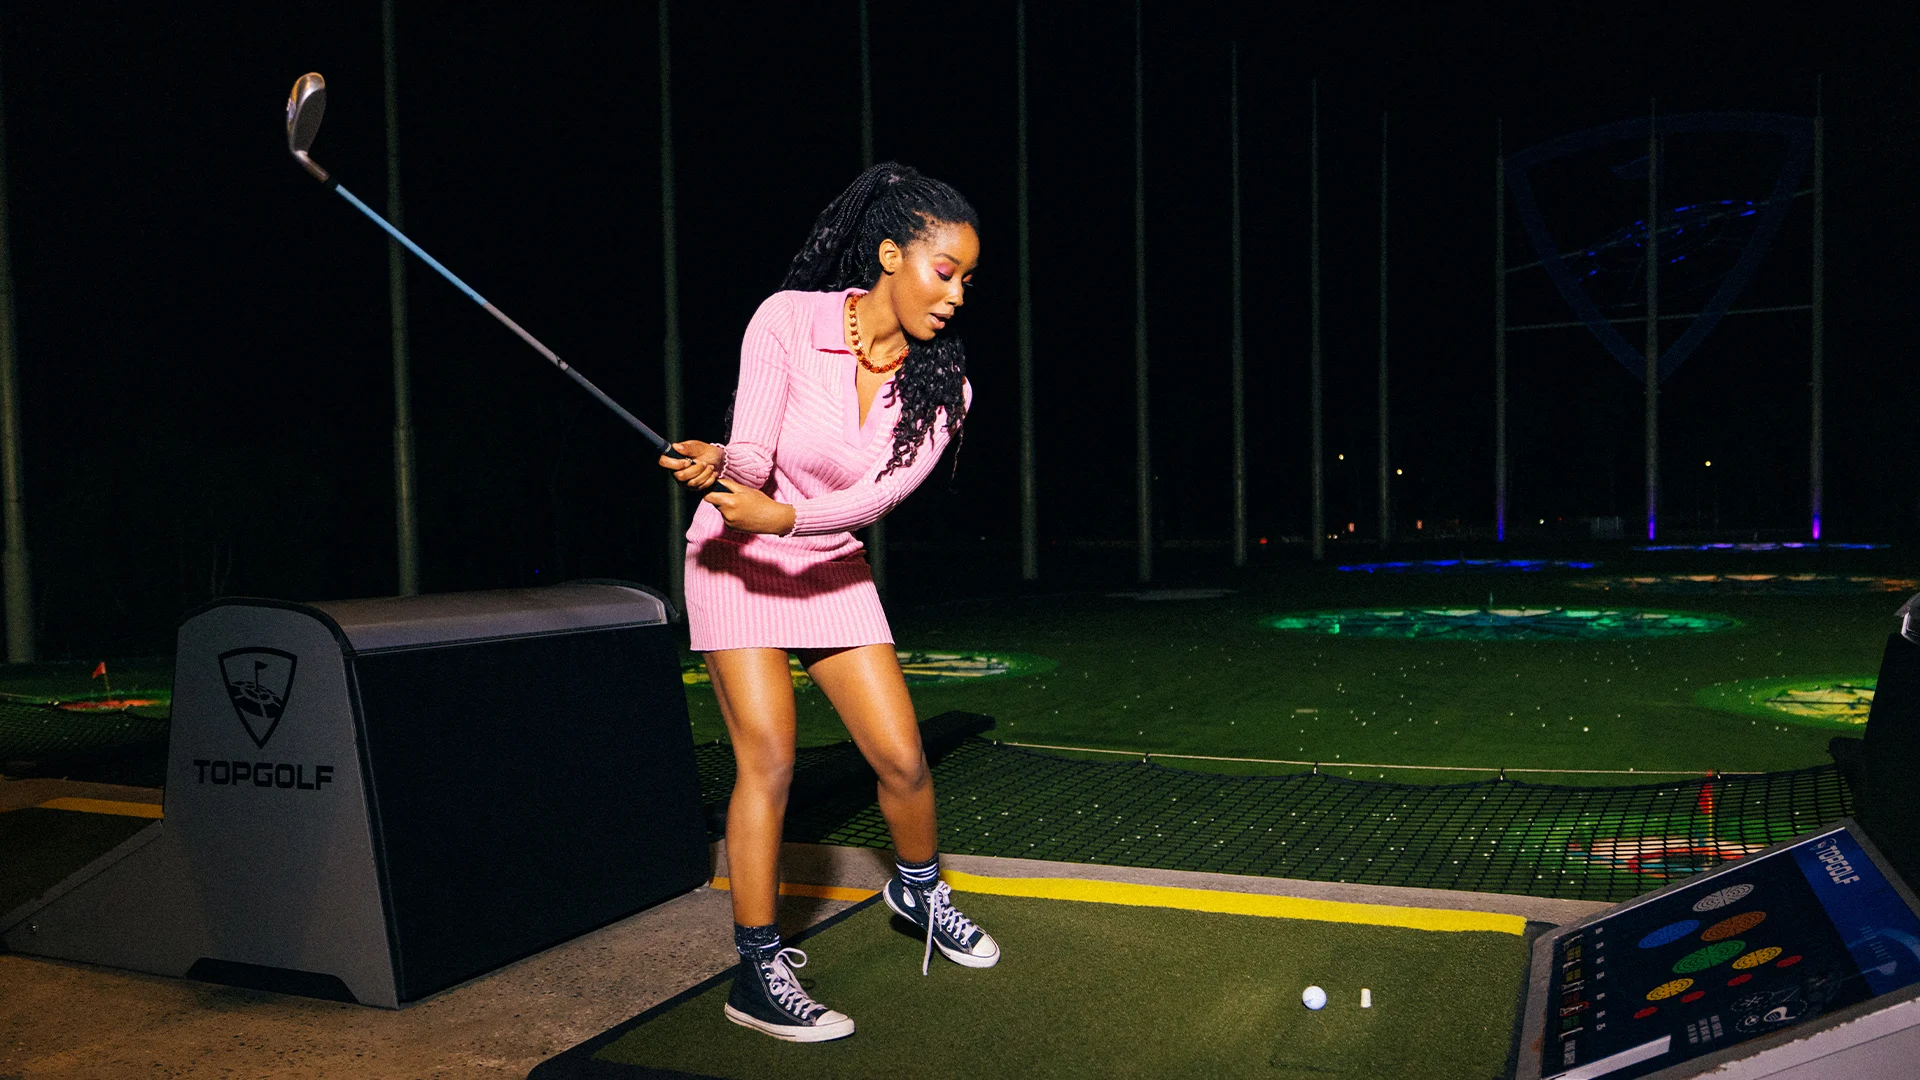 A woman in a pink dress enjoying a game of golf at the Gold Coast's popular entertainment complex, Topgolf.